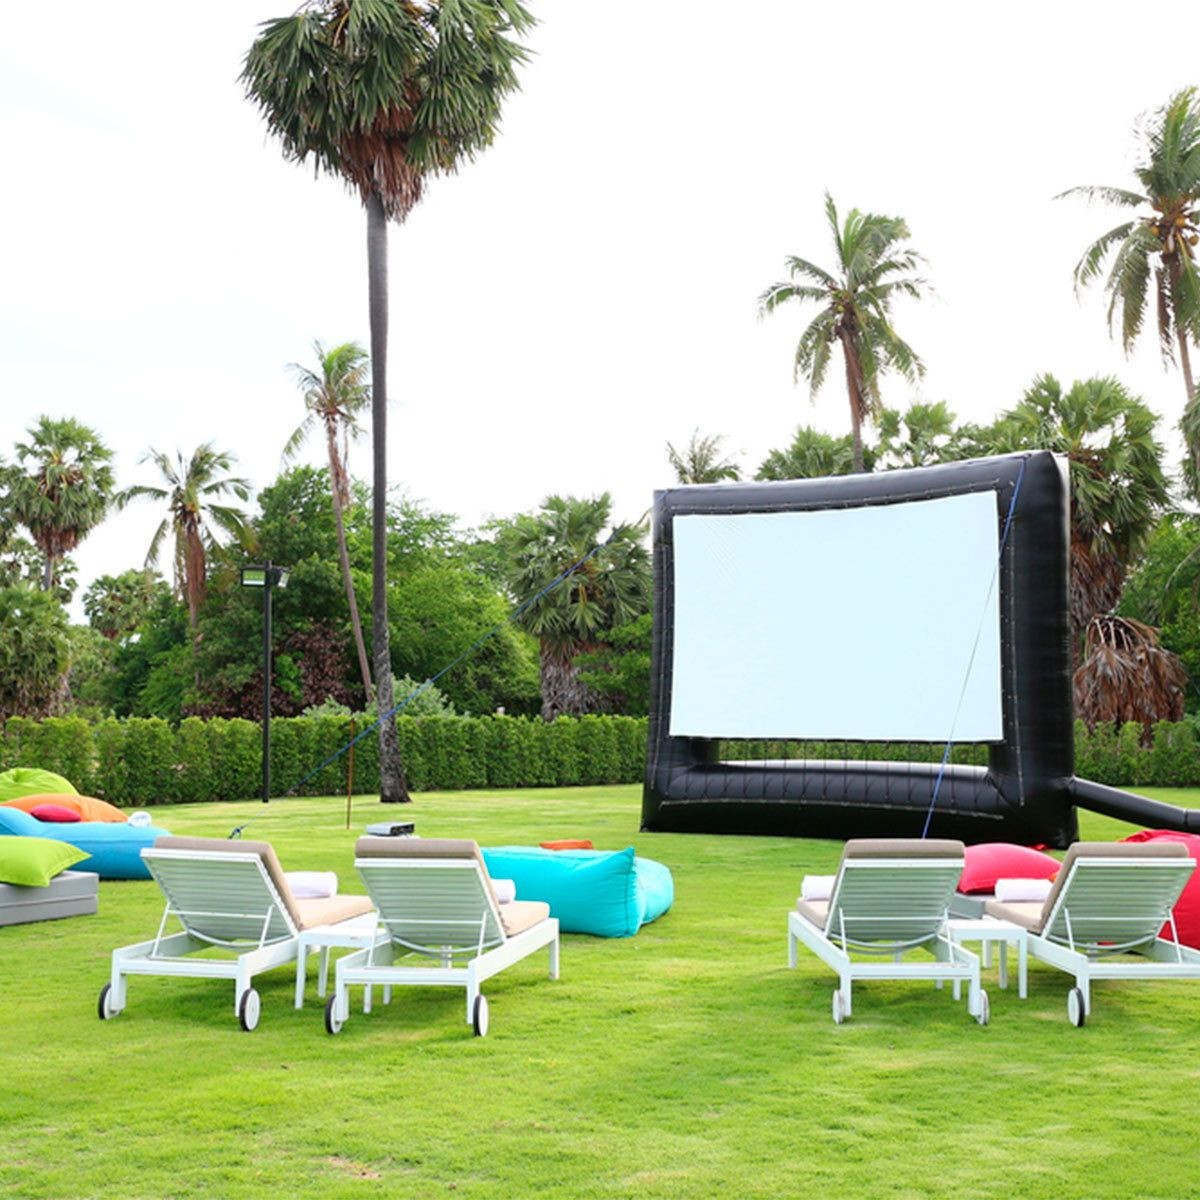 DIY Outdoor Movie Projector
 What You Need for a DIY Backyard Movie Theater